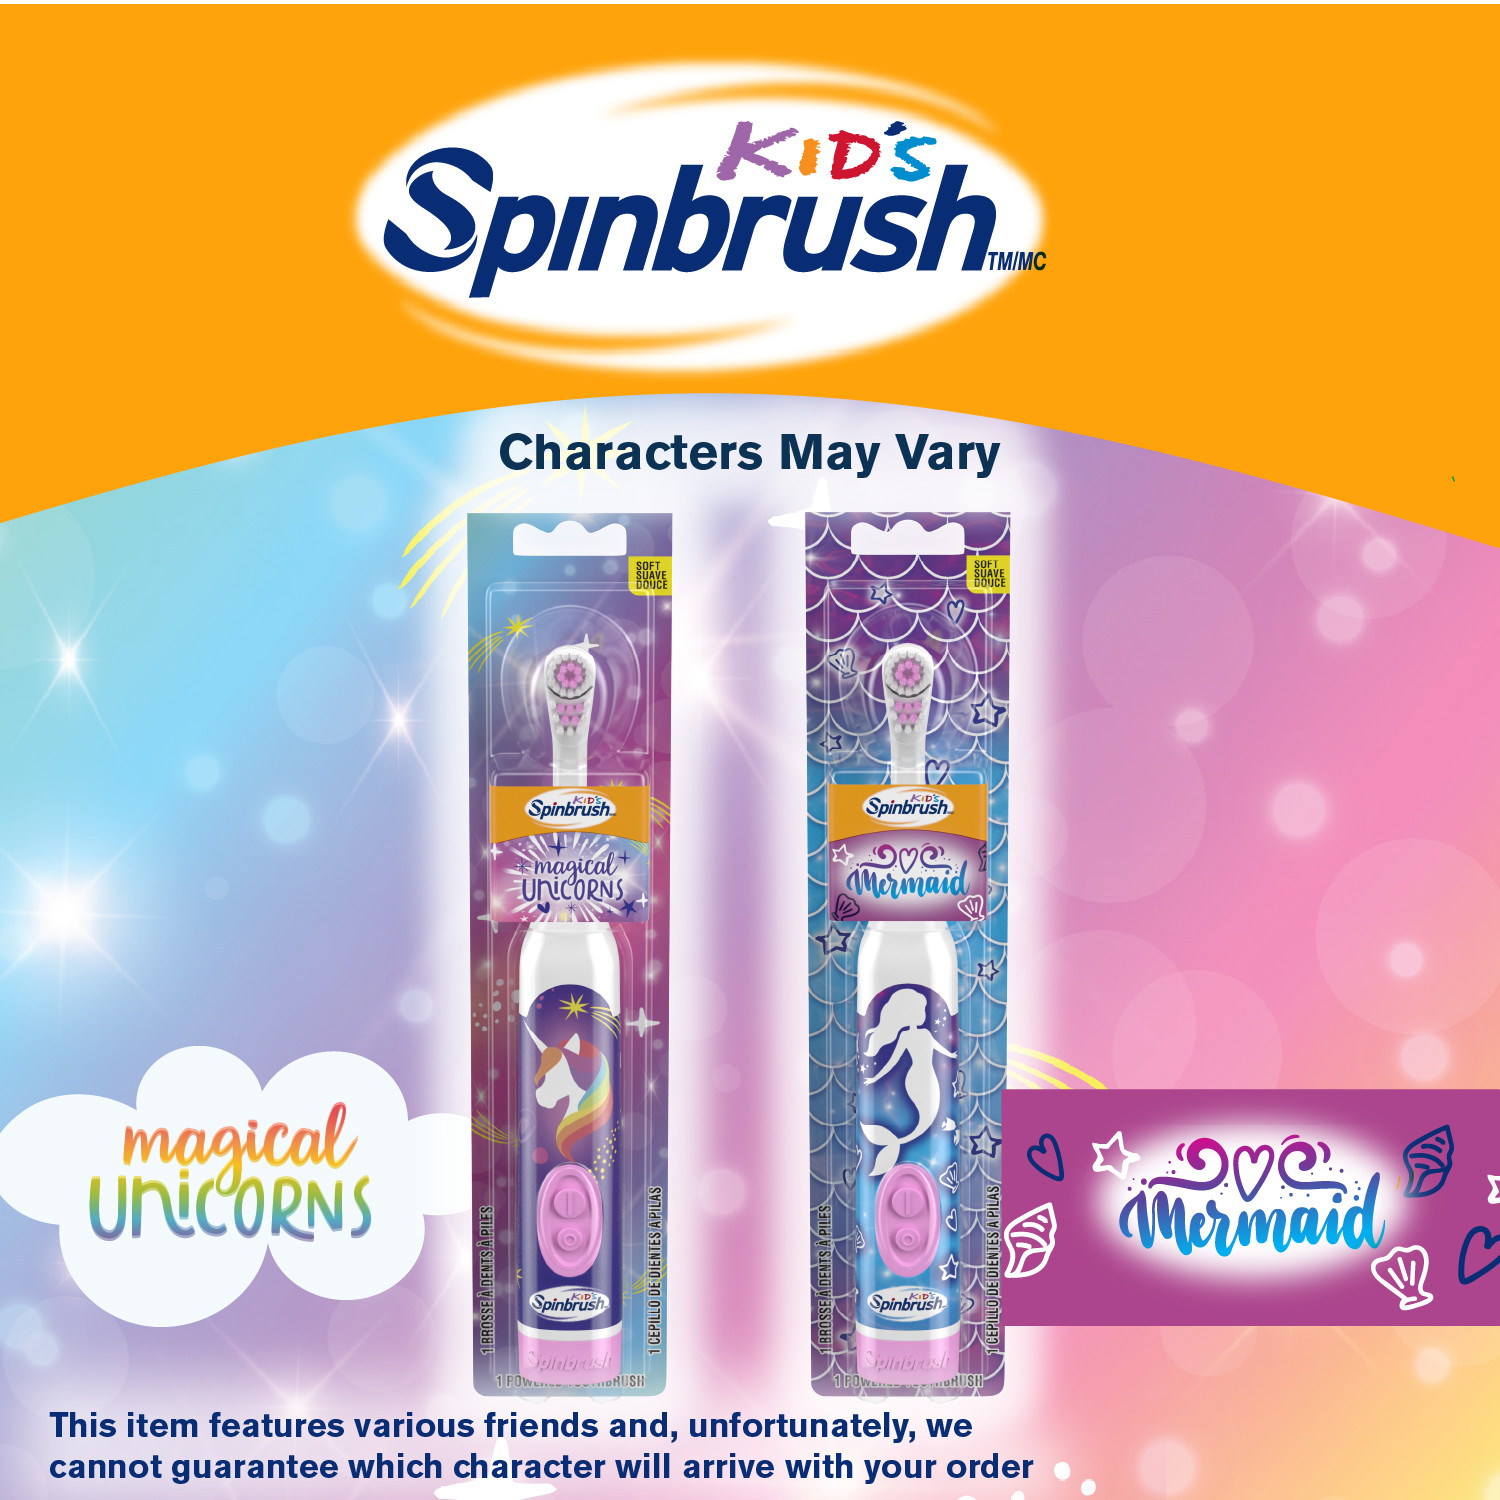 Mermaid & Unicorn Kid’s Spinbrush Electric Battery Toothbrush, Soft, 1 ct, Character May Vary - image 4 of 7